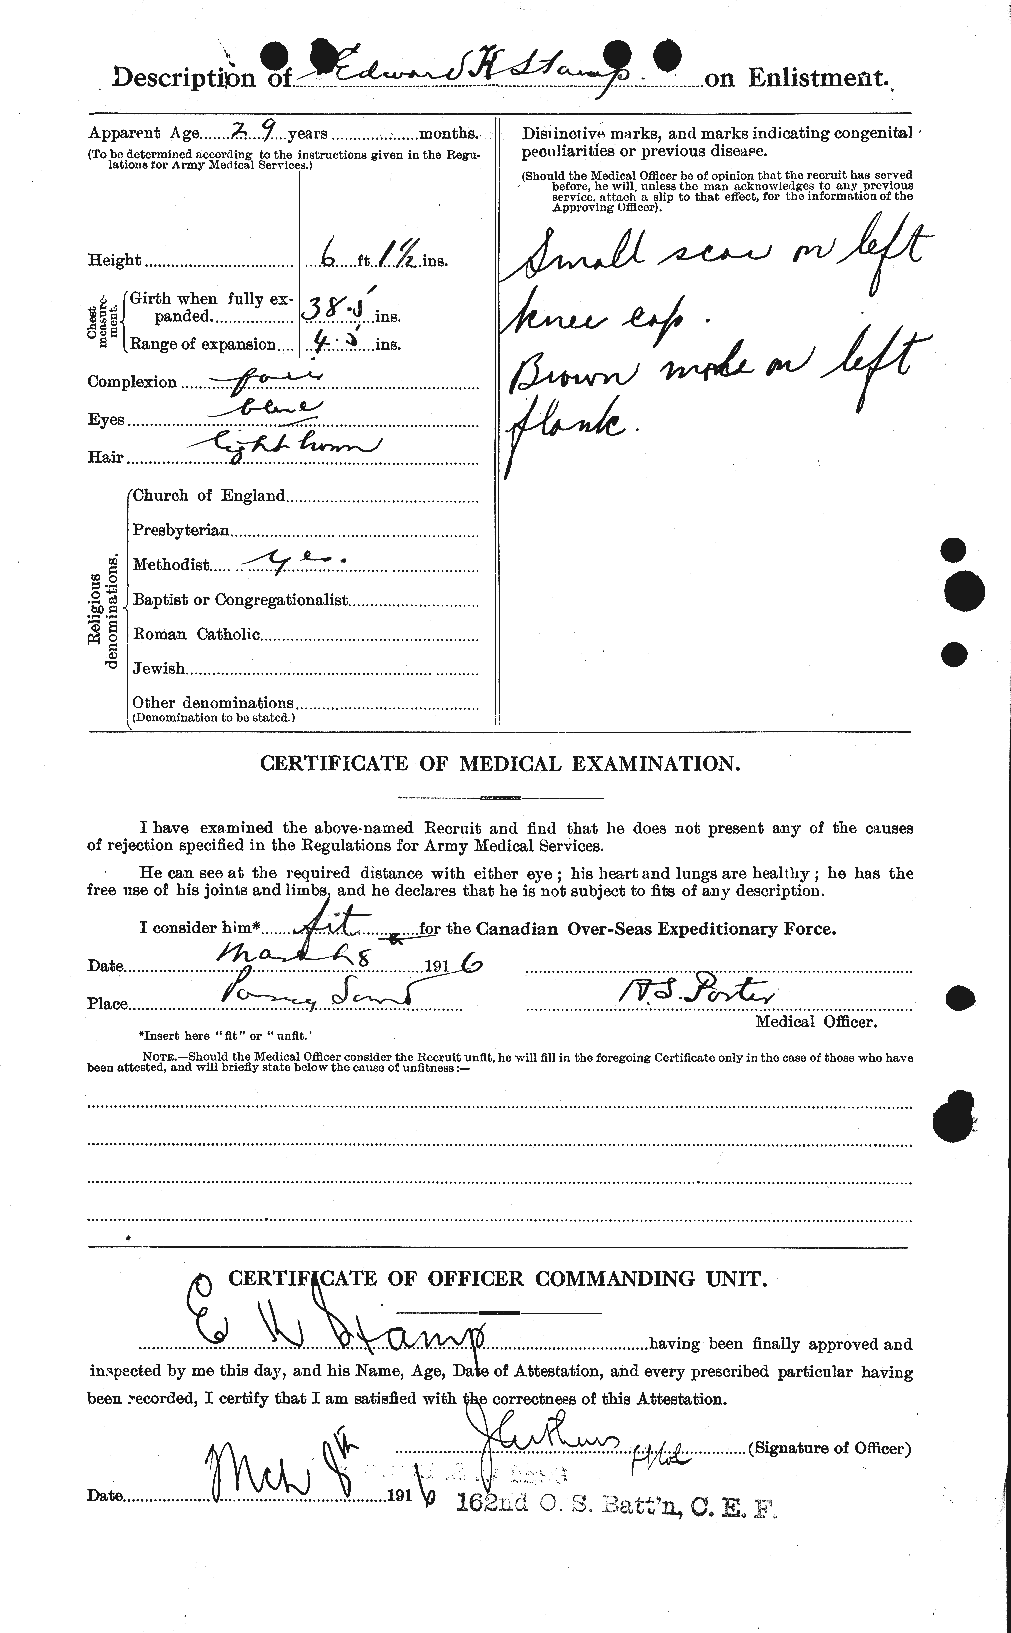 Personnel Records of the First World War - CEF 116482b